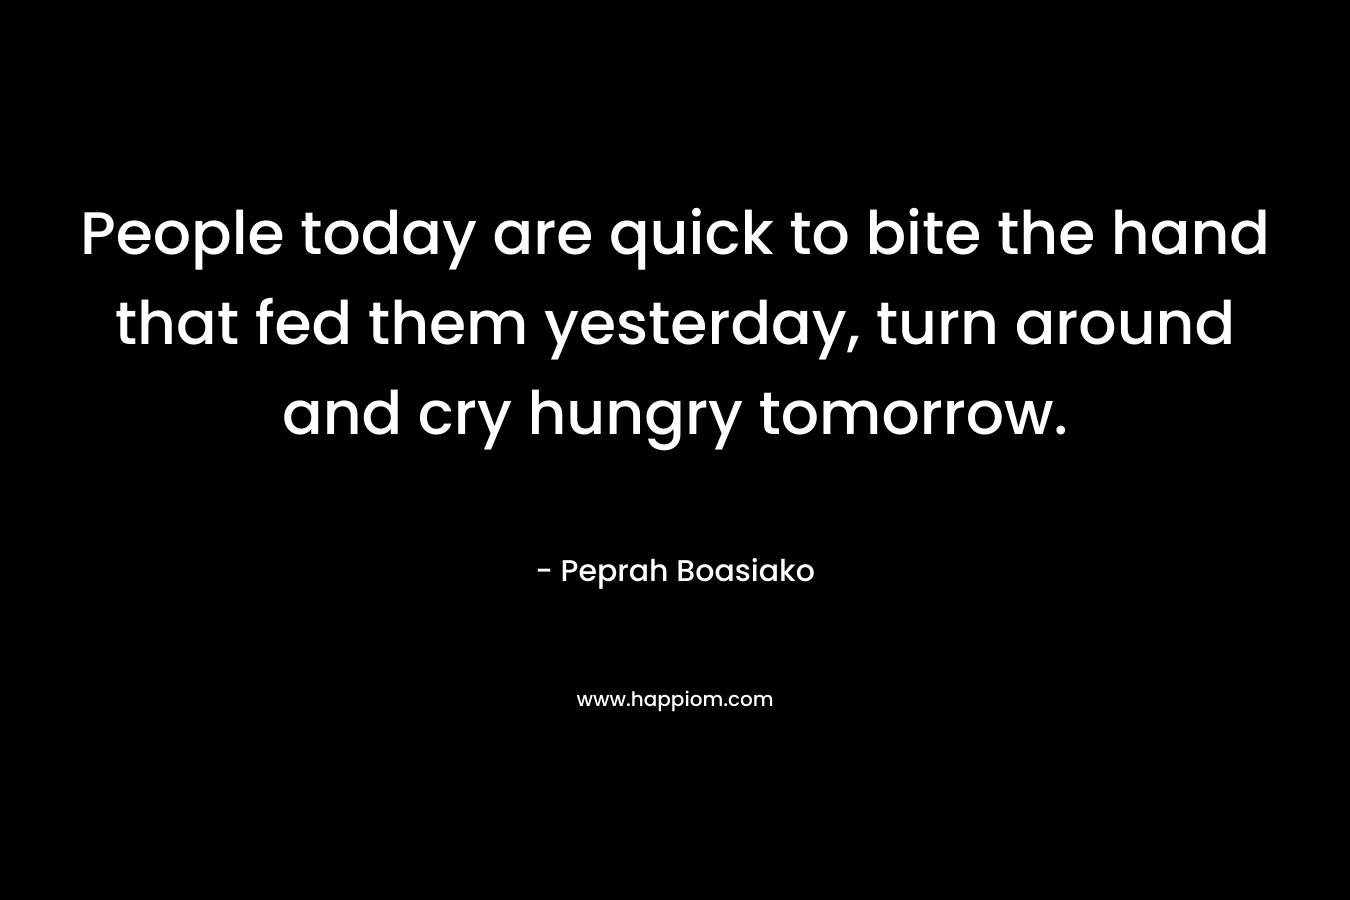 People today are quick to bite the hand that fed them yesterday, turn around and cry hungry tomorrow. – Peprah Boasiako